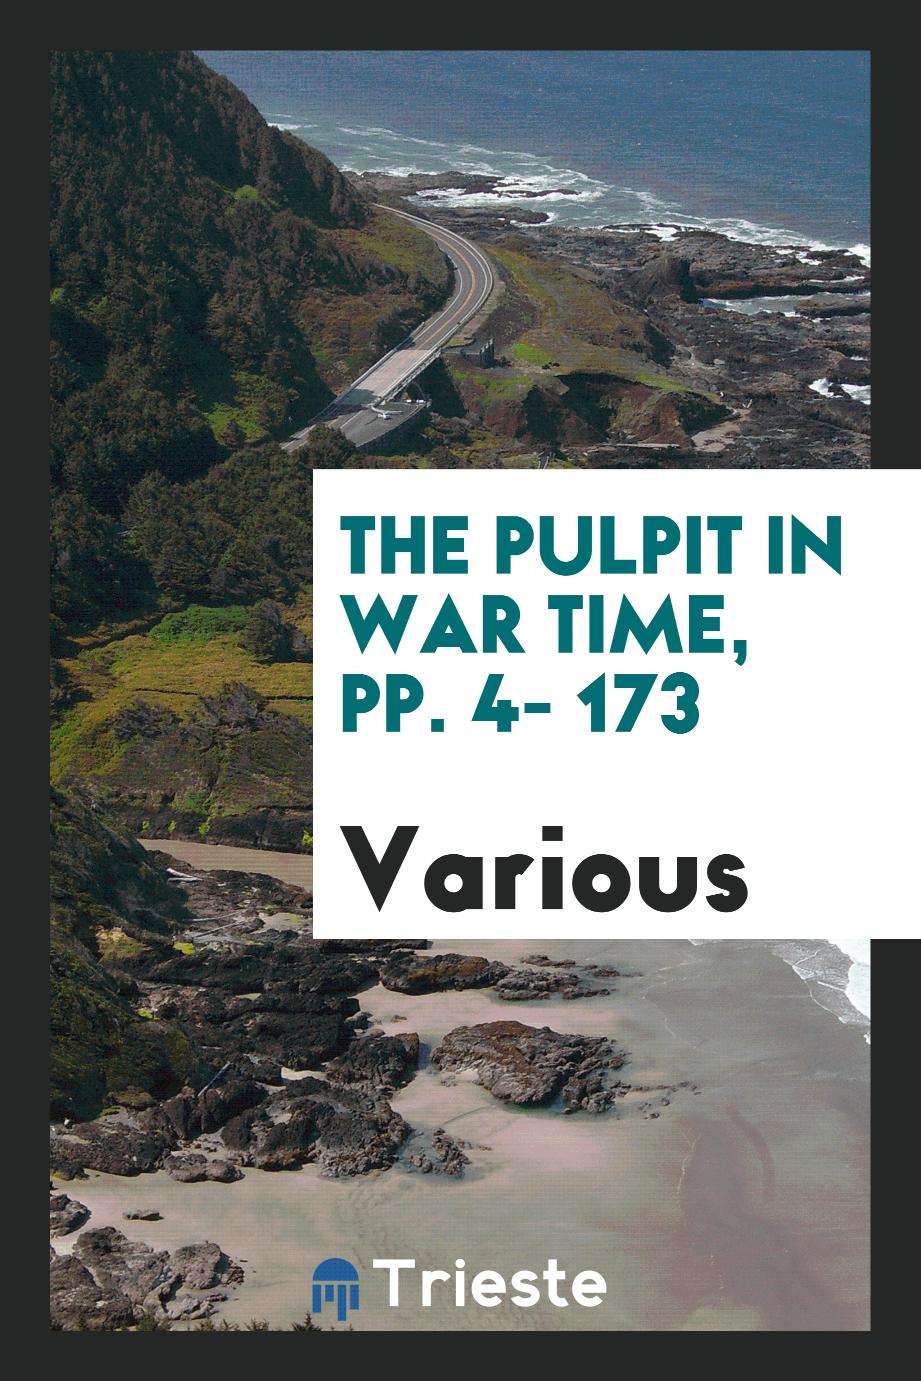 The Pulpit in War Time, pp. 4- 173